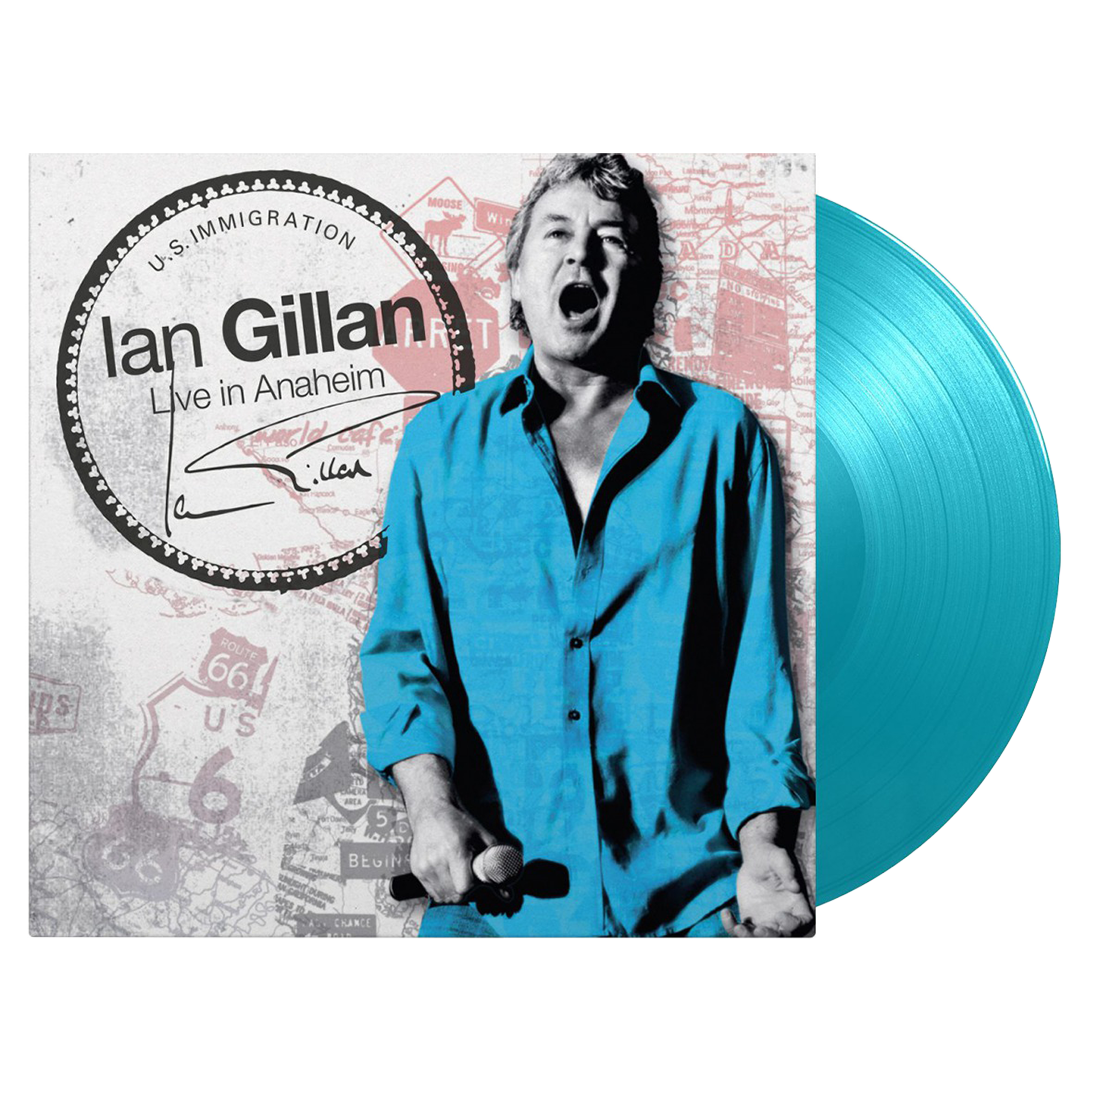 Live In Anaheim: Limited Turquoise Vinyl 2LP